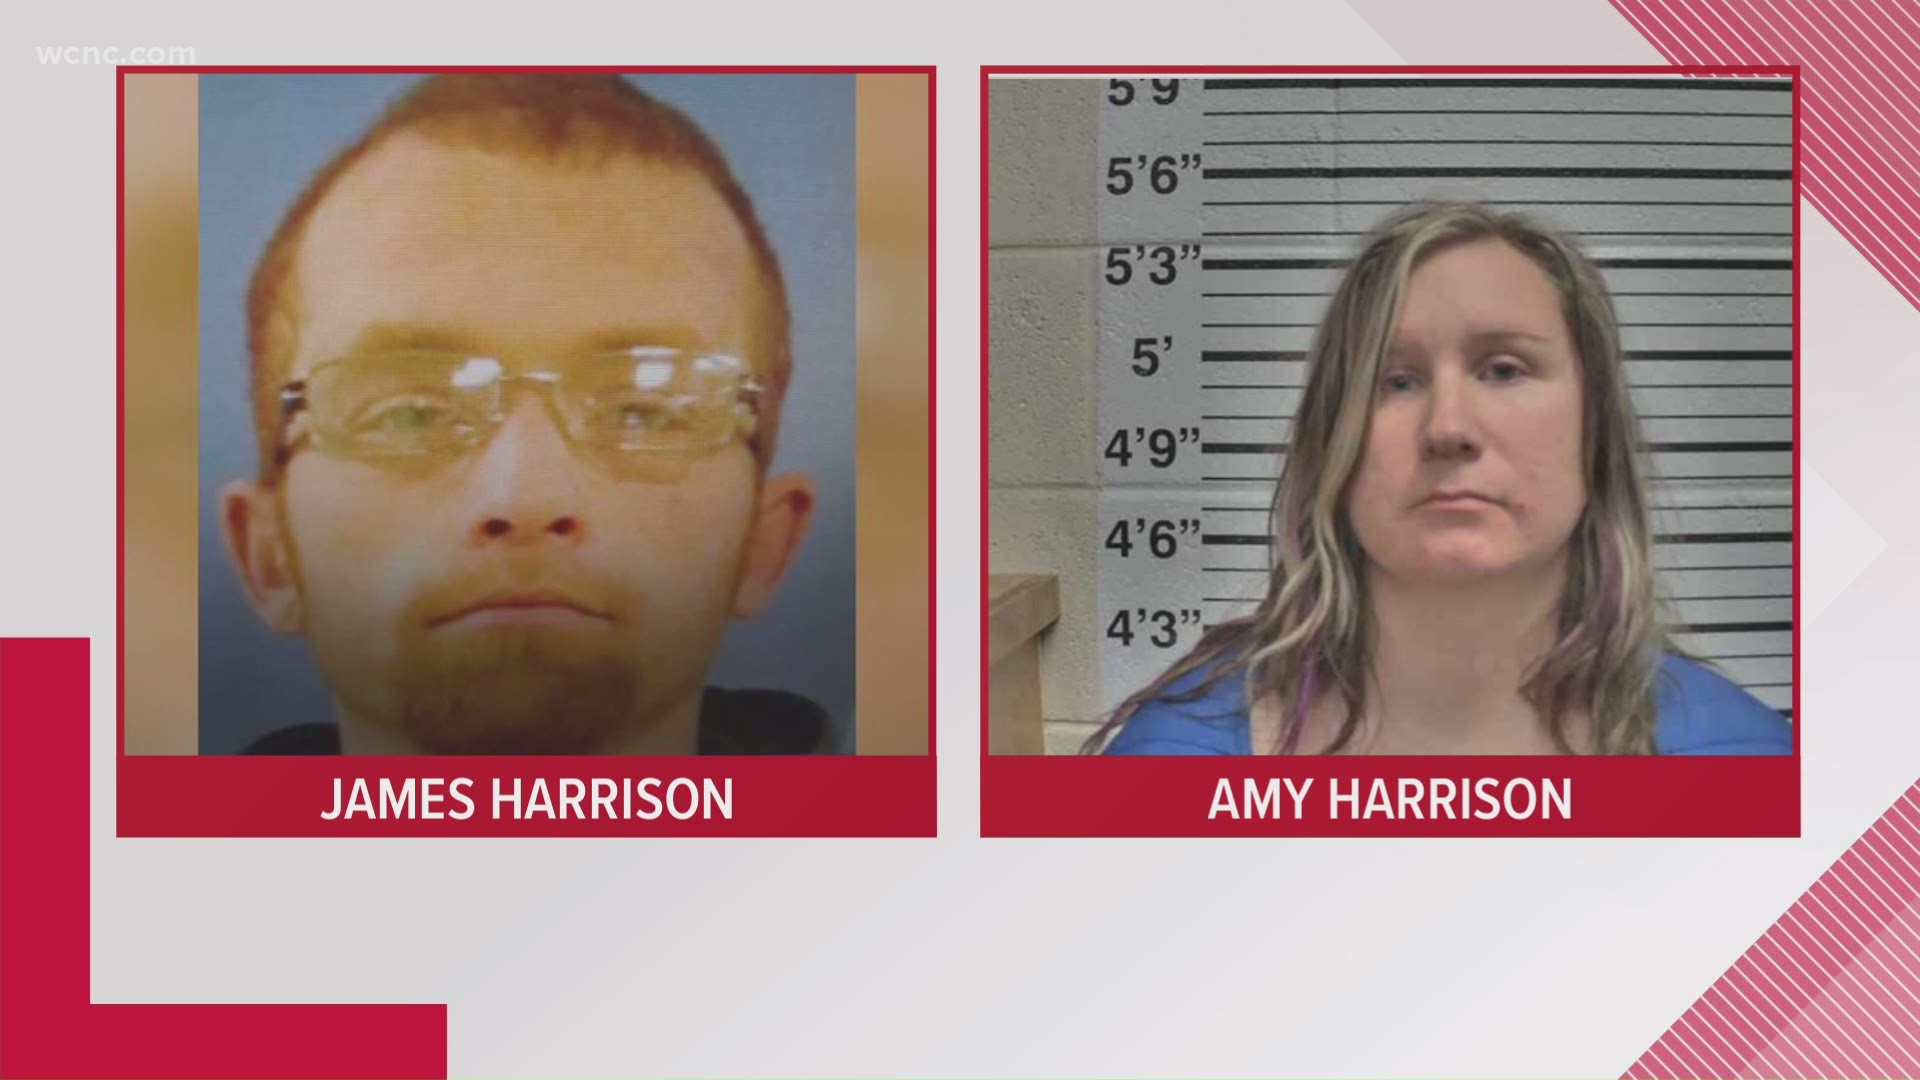 The 7-year-old boy and 2-year-old girl were left abandoned in the family's pickup truck, authorities said. Their mom is in custody and the search continues for dad.